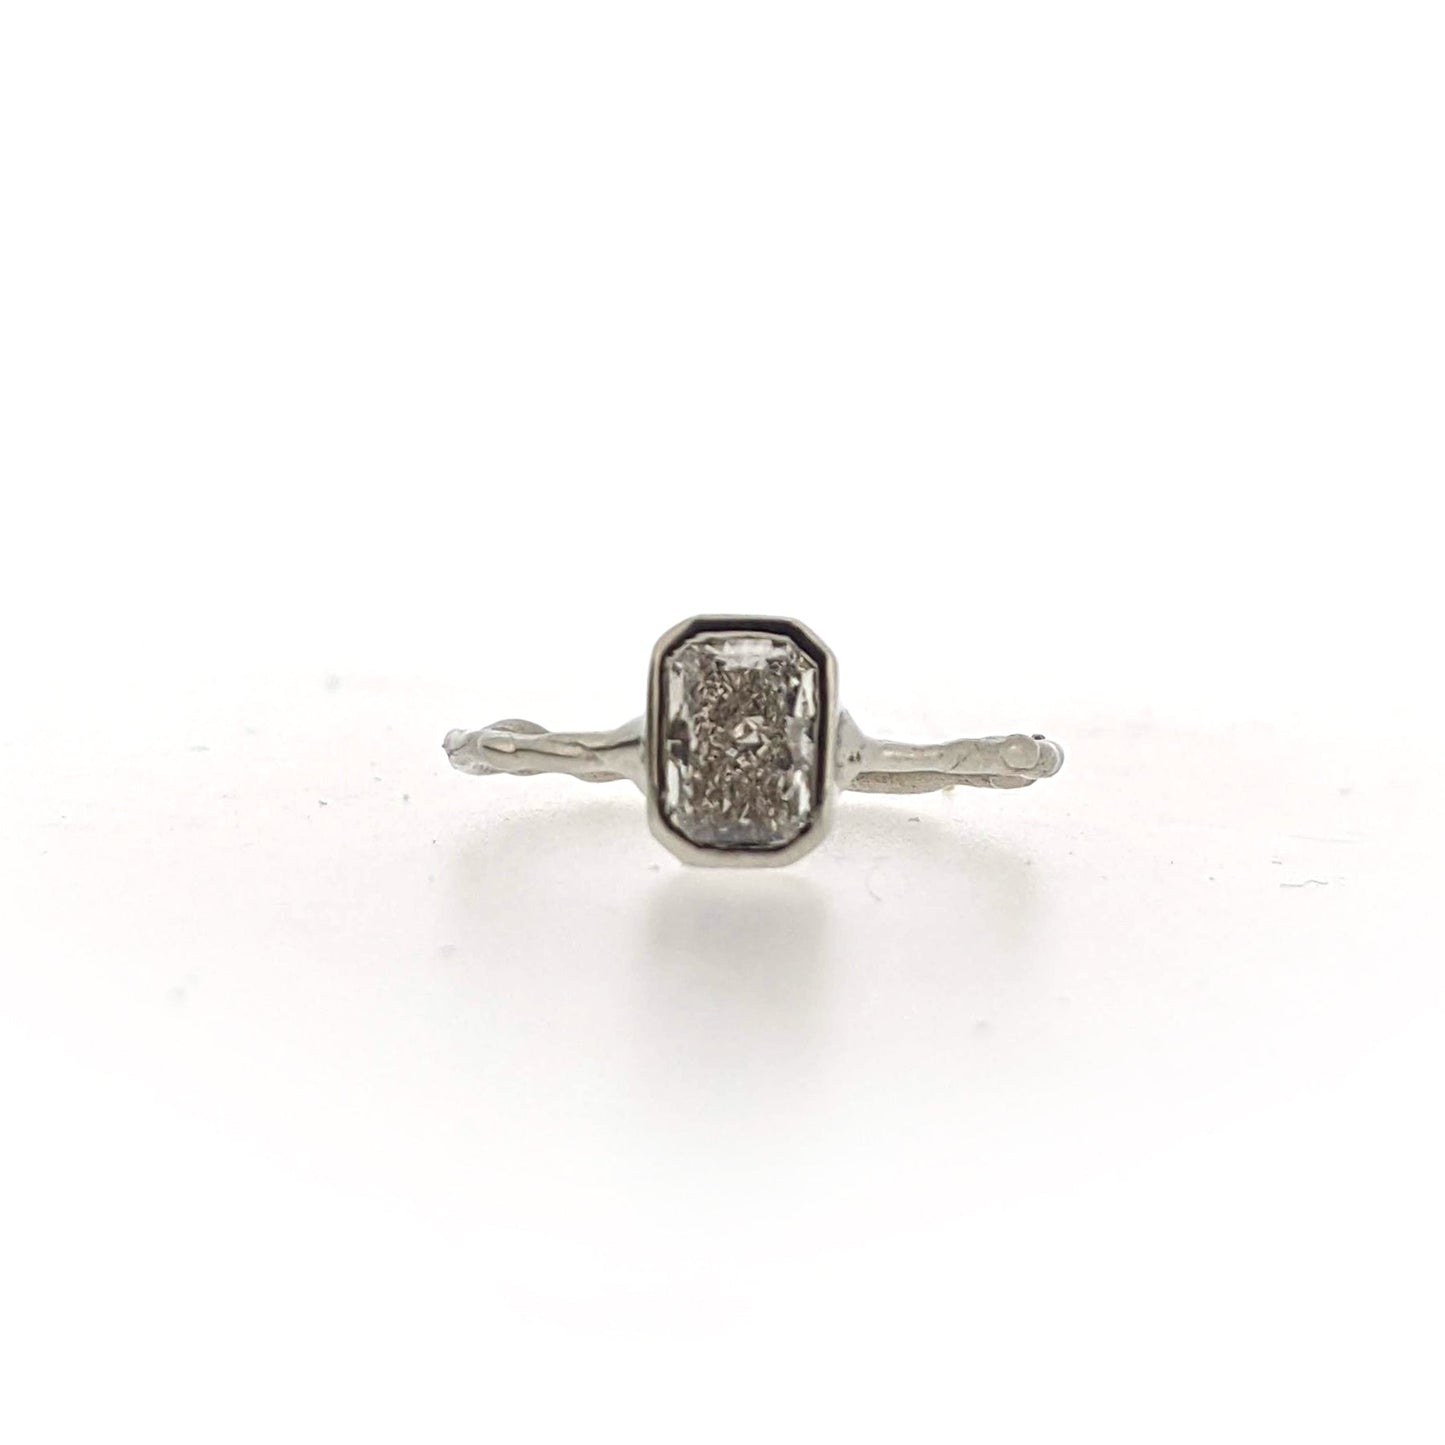 Full view of front of AnnaBeth Diamond Ring. This ring is made of white gold, has an organic texture throughout and a set rectangular shaped diamond at the top.